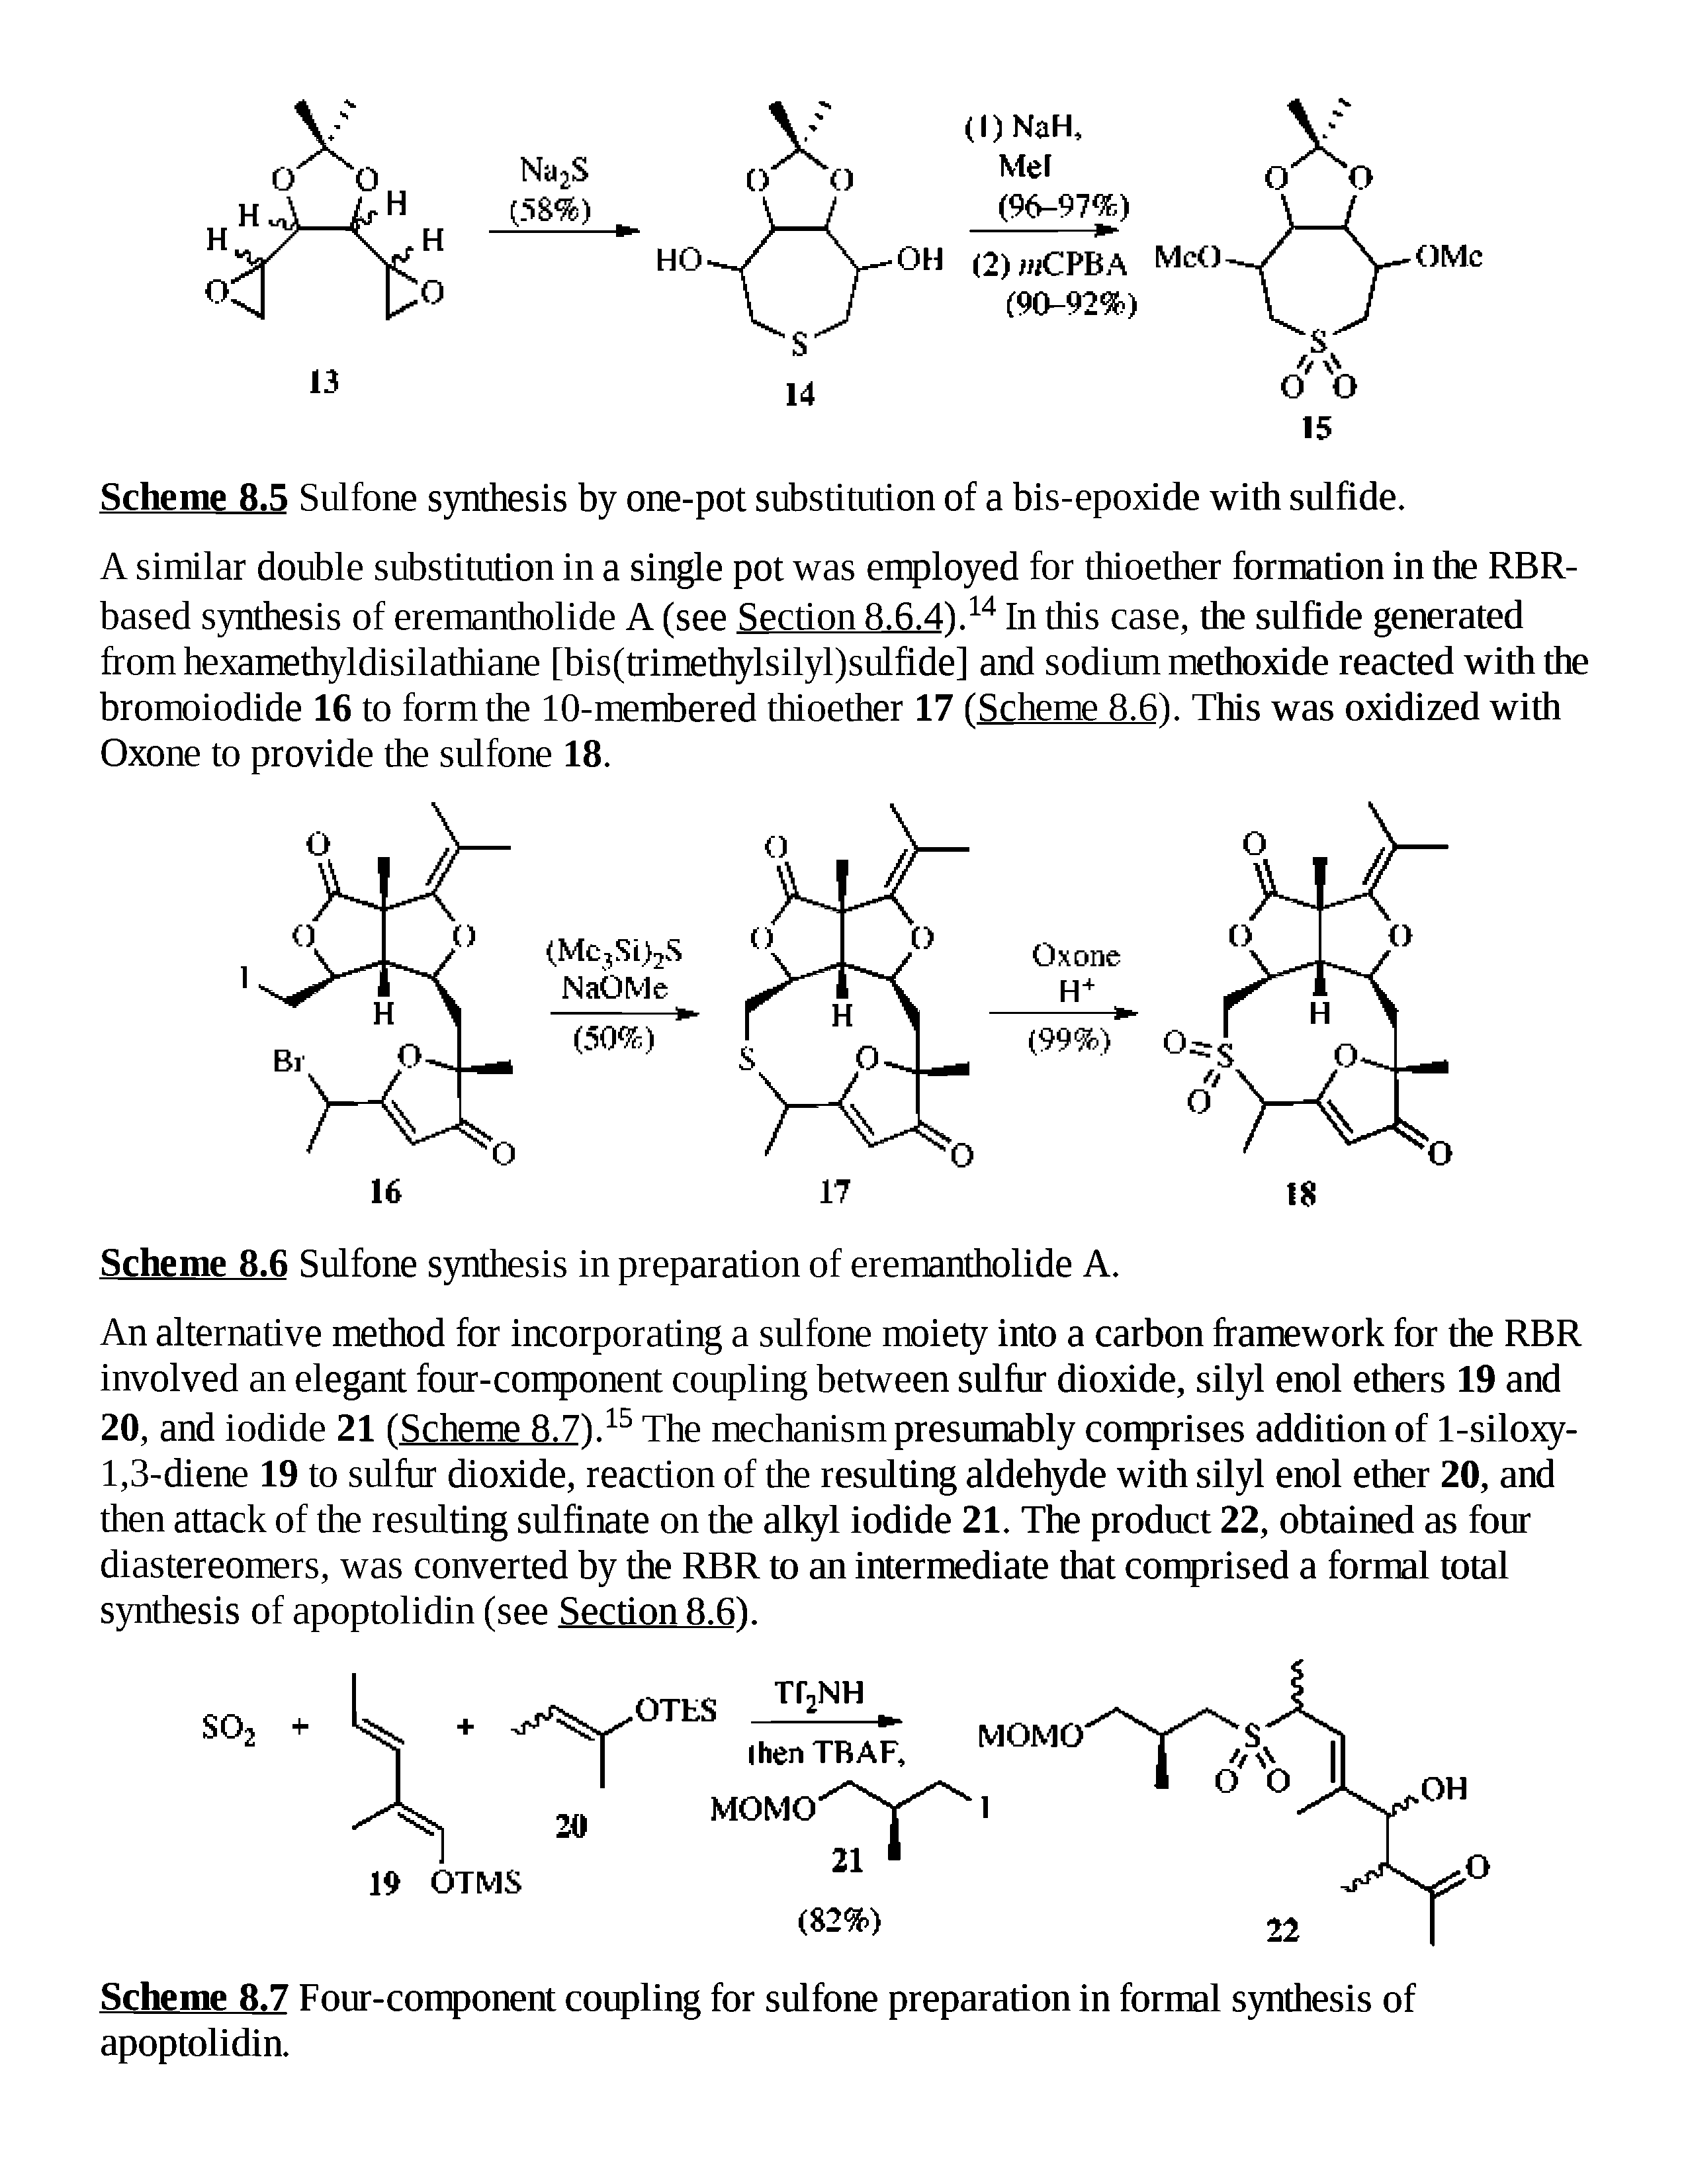 Scheme 8.7 Four-conponent coupling for sulfone preparation in formal synthesis of apoptolidin.